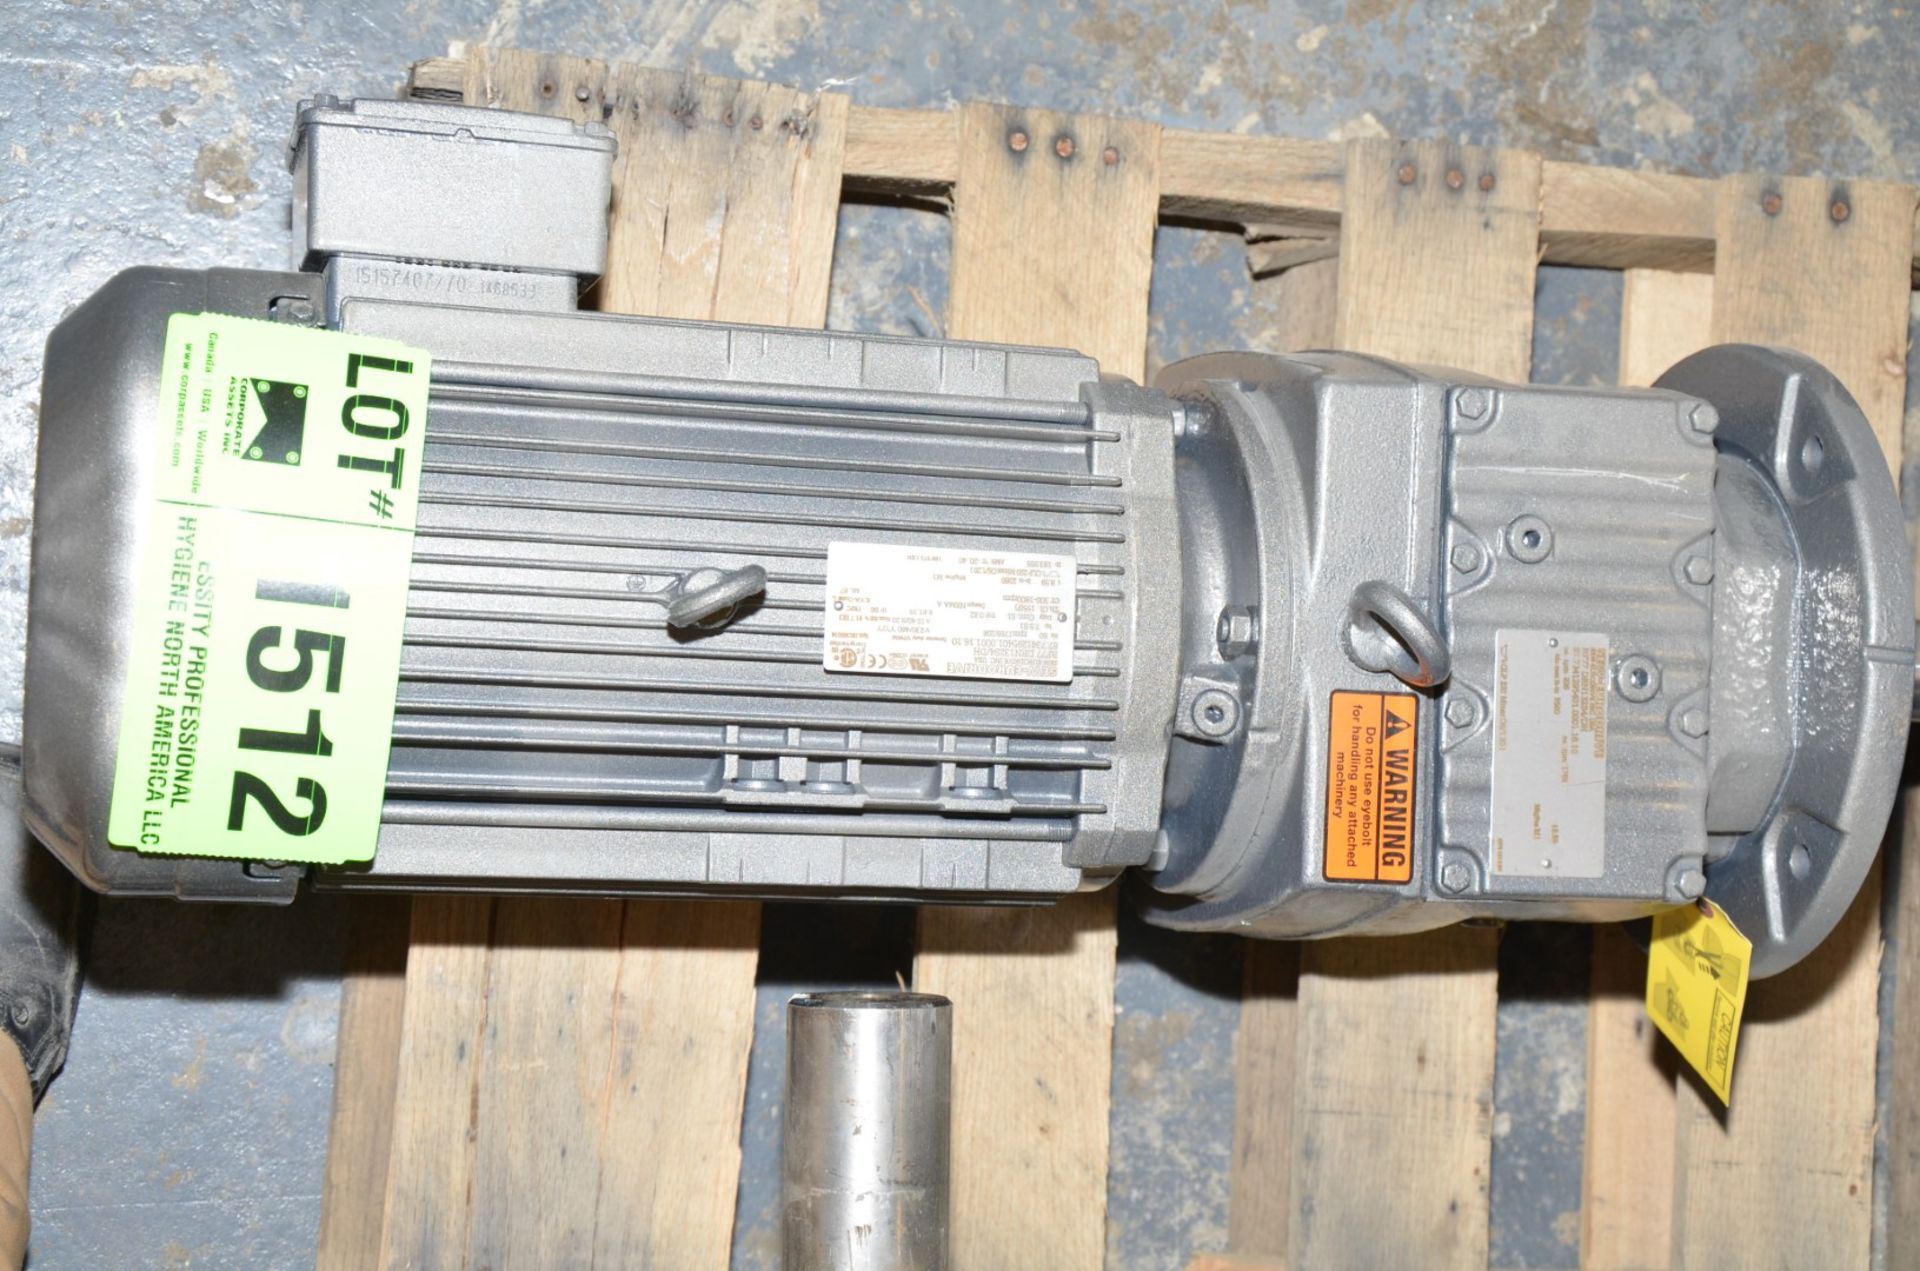 SEW EURODRIVE RAF77DRN132S4/DH GEAR MOTOR WITH 7.5 HP [RIGGING FEE FOR LOT #1512 - $25 USD PLUS